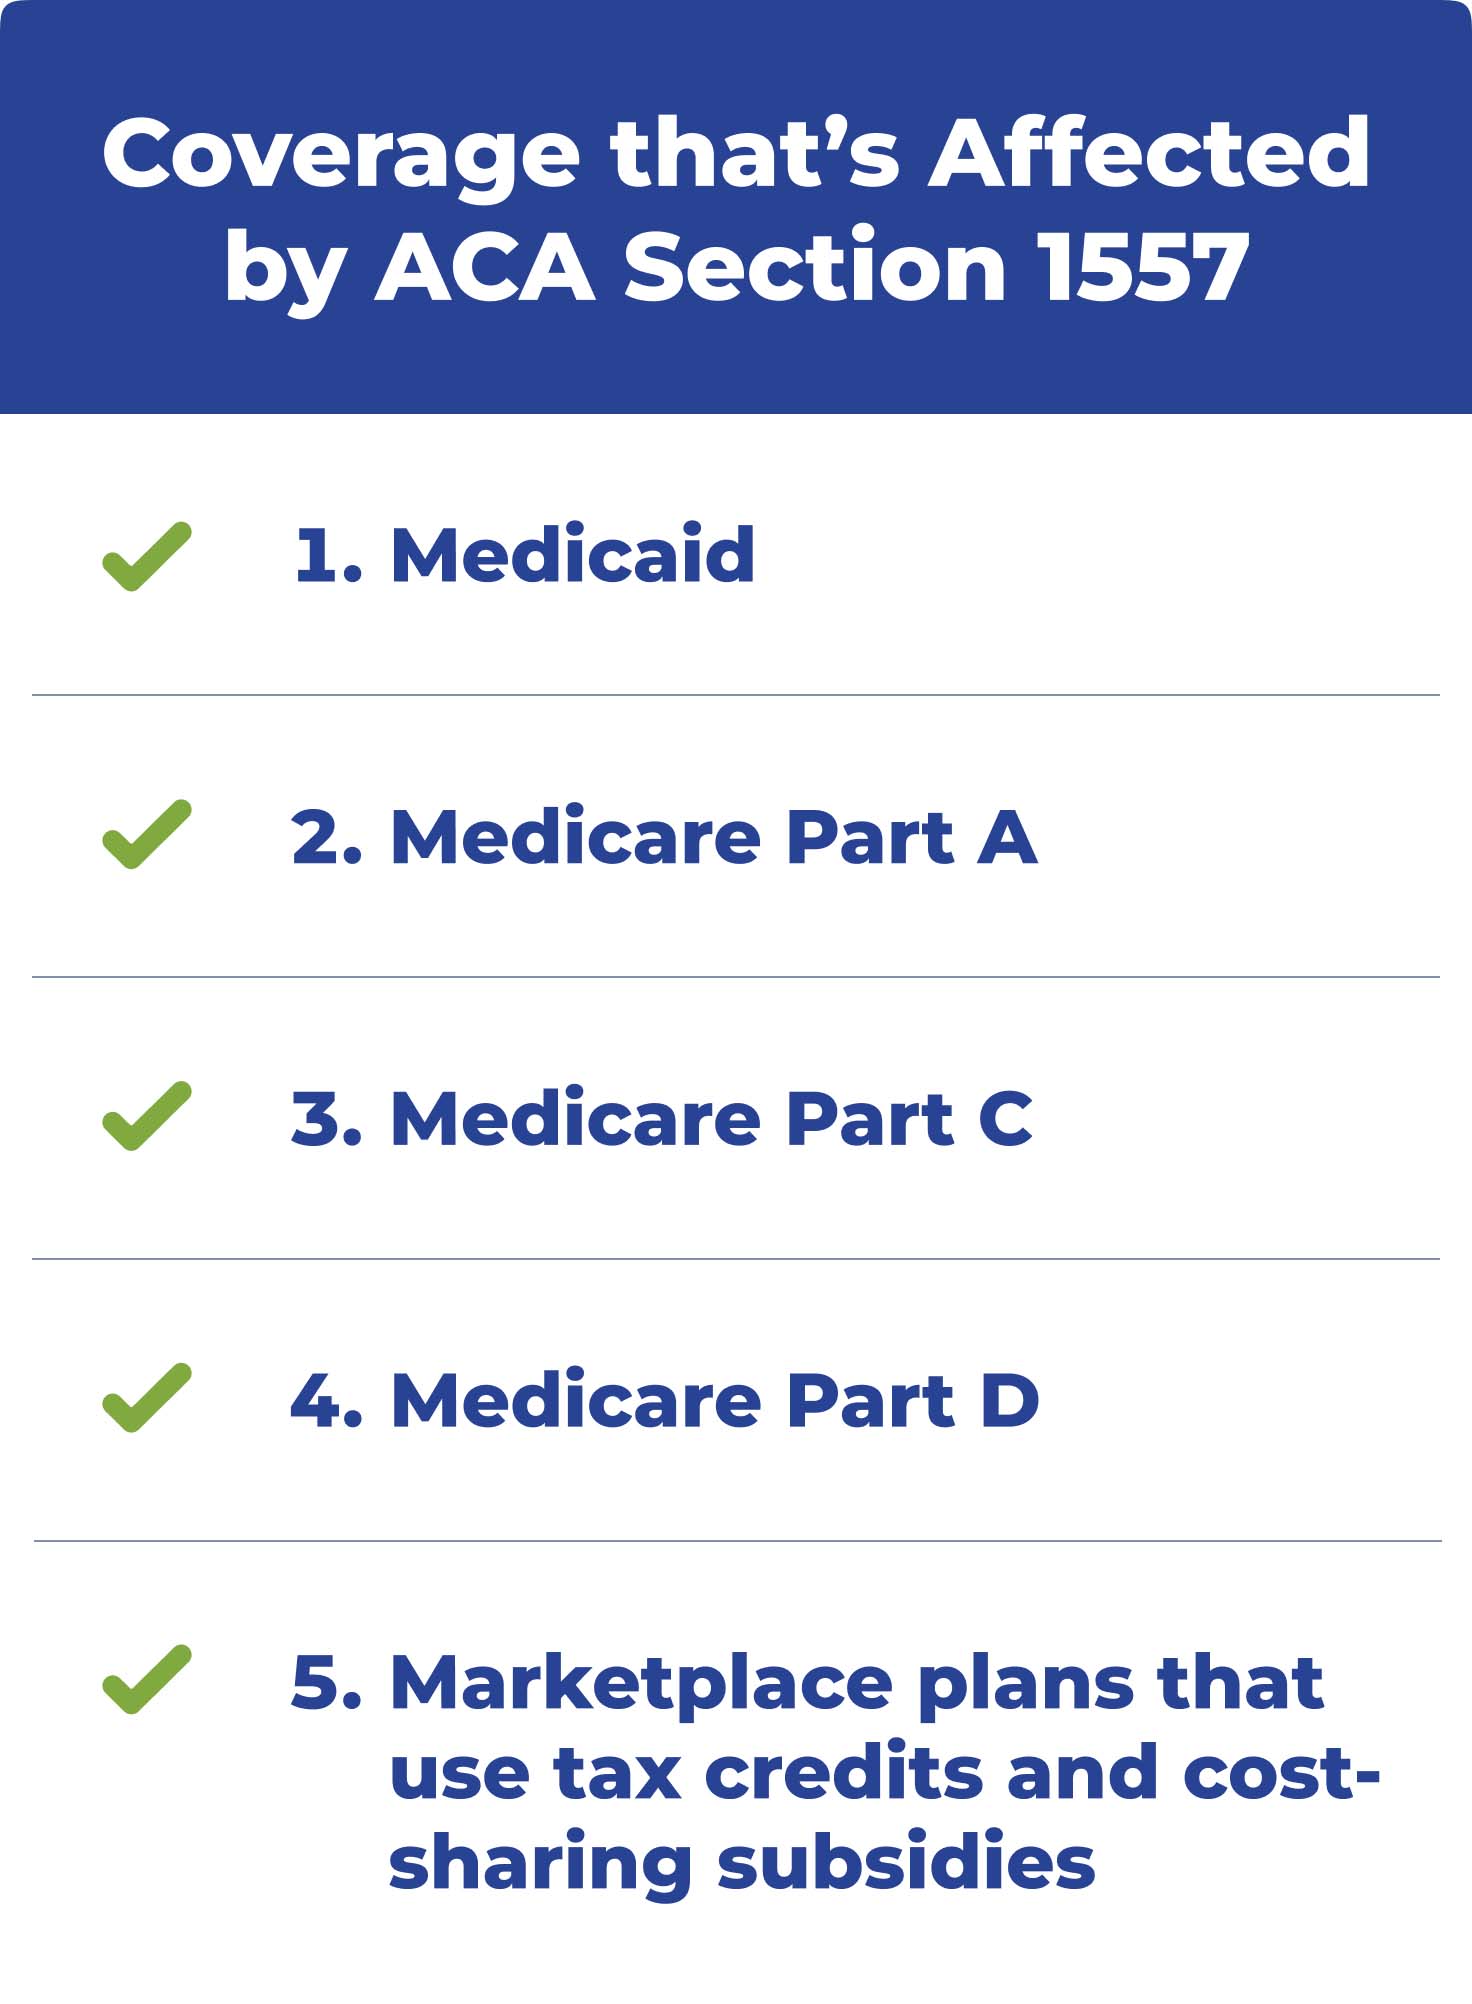 coverage that's affected by aca section 1557